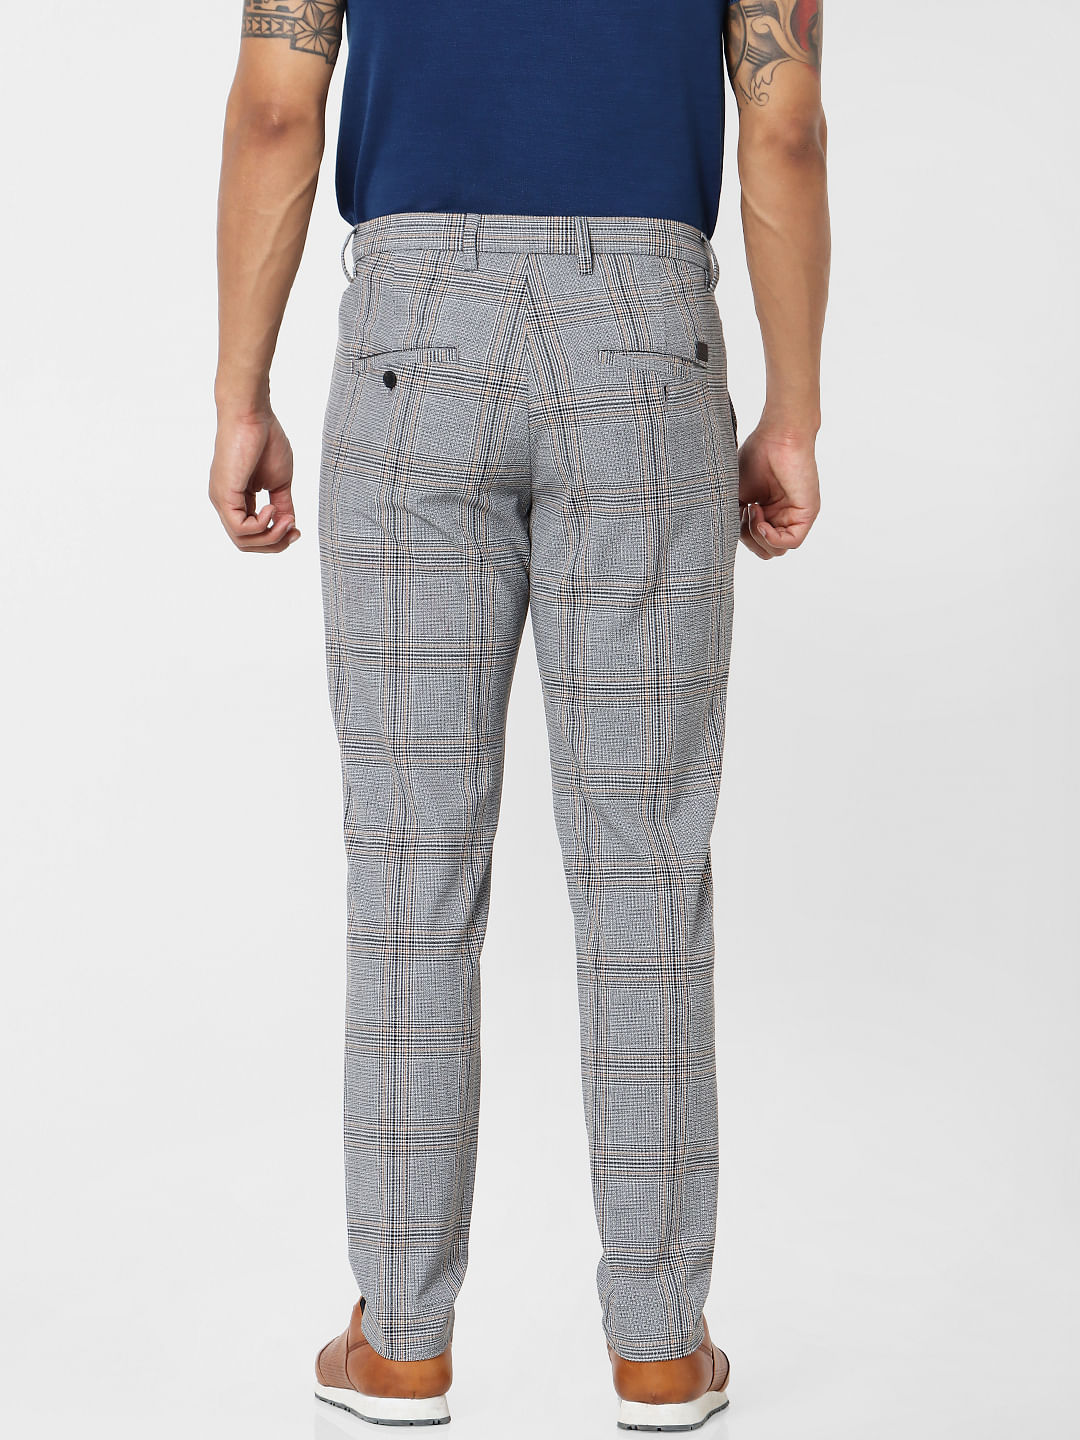 Jack and Jones Intelligence smart check trousers in grey  ShopStyle Chinos   Khakis